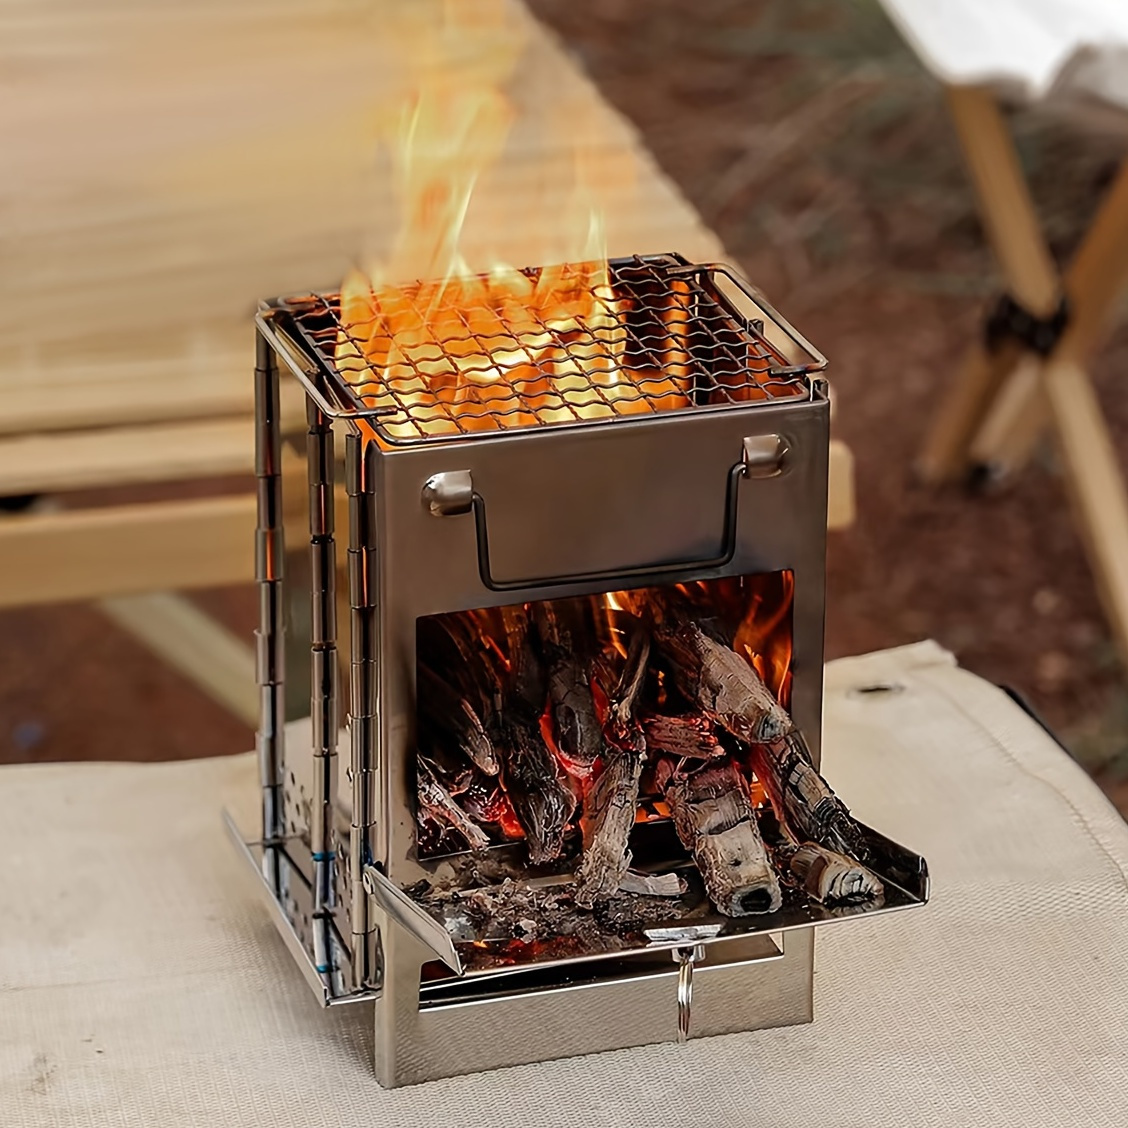 

Portable Mini Stainless Steel Firewood Stove For Camping, Picnic, And Bbq - Compact And Lightweight